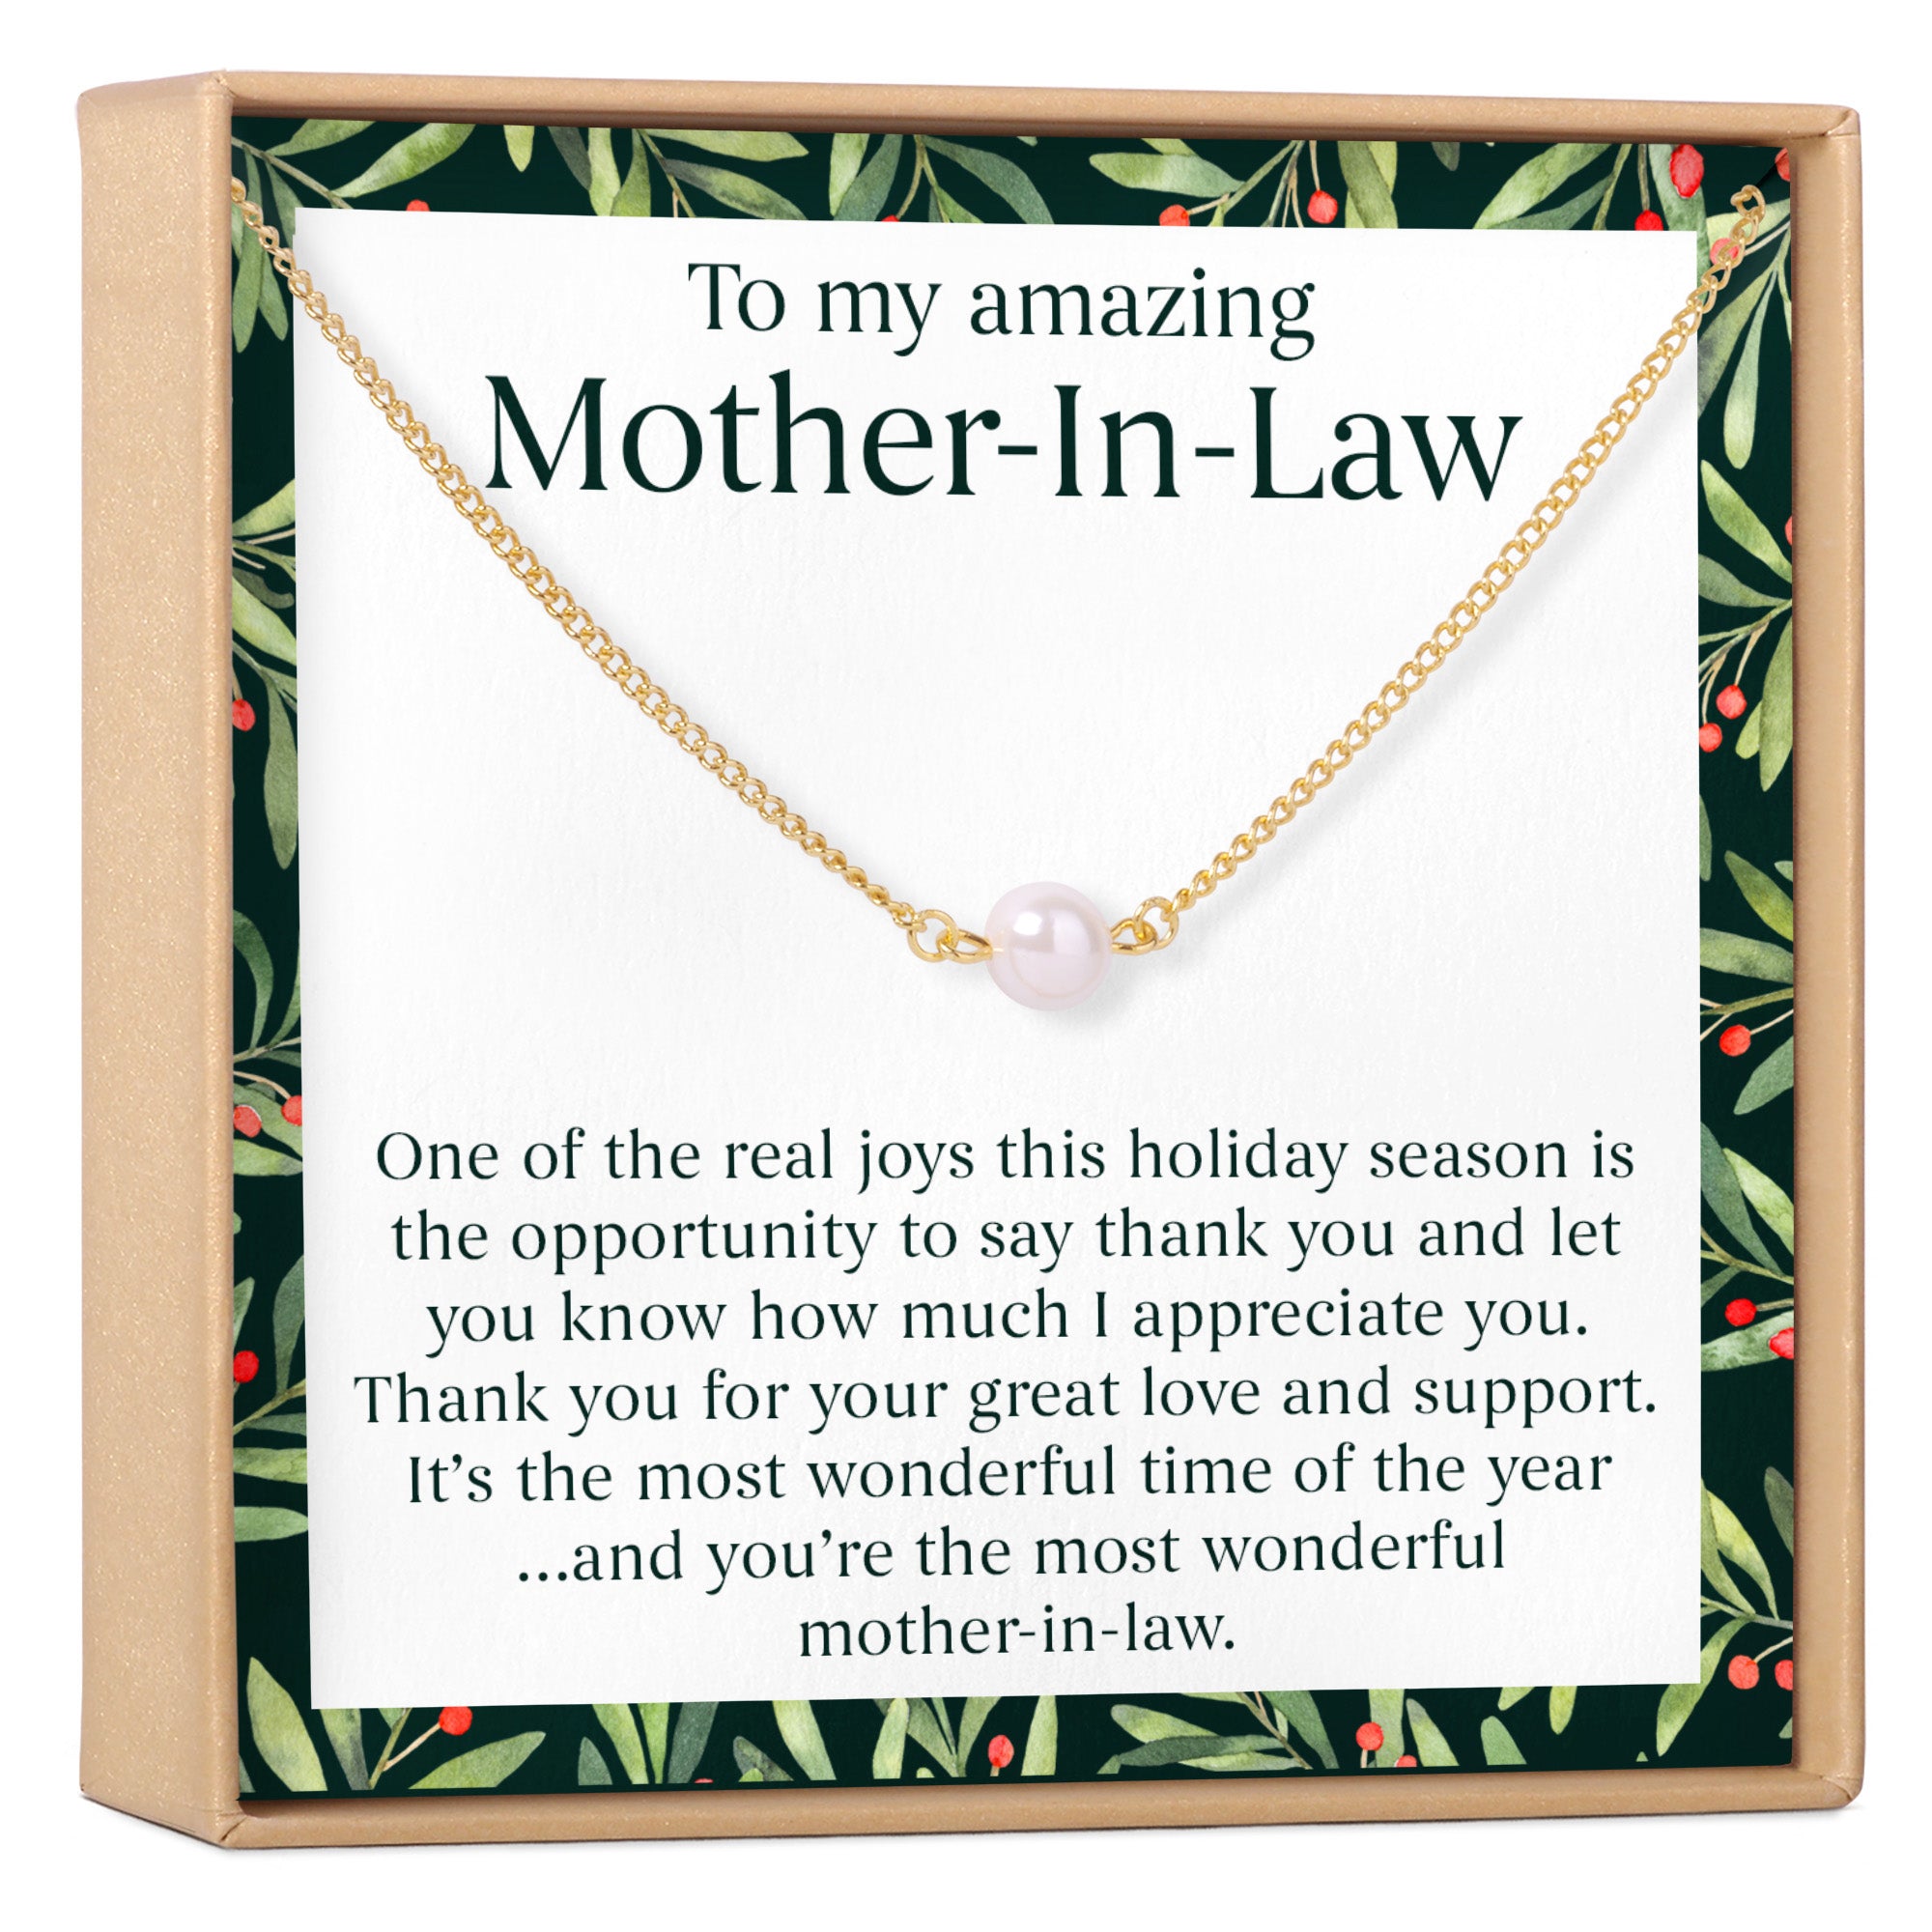 Christmas Gift for Mother in Law: Present, Necklace, Jewelry, Xmas Gift, Gift Idea for Mother in Law, Husband's Mom, Multiple Styles, Pearl Necklace /